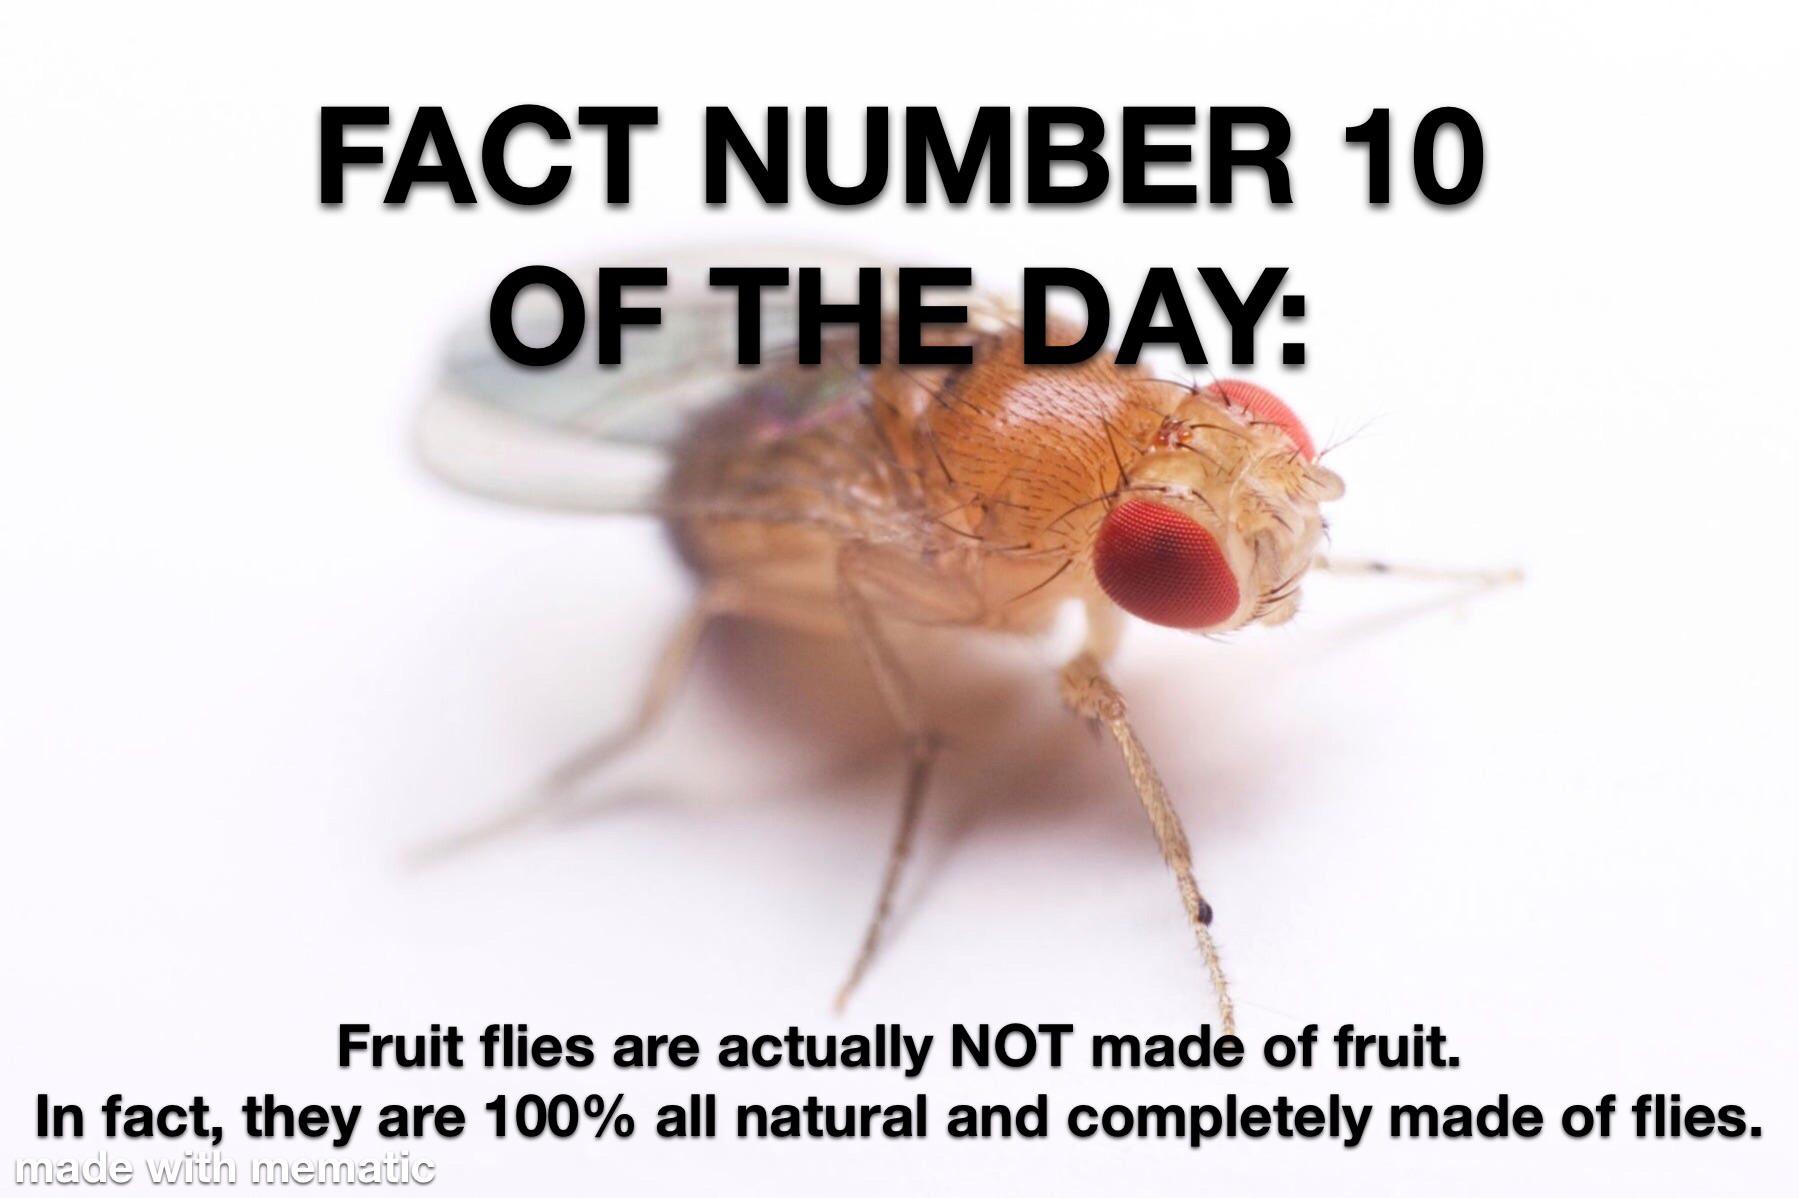 fauna - Fact Number 10 Of The Day Fruit flies are actually Not made of fruit. In fact, they are 100% all natural and completely made of flies. made with mematic